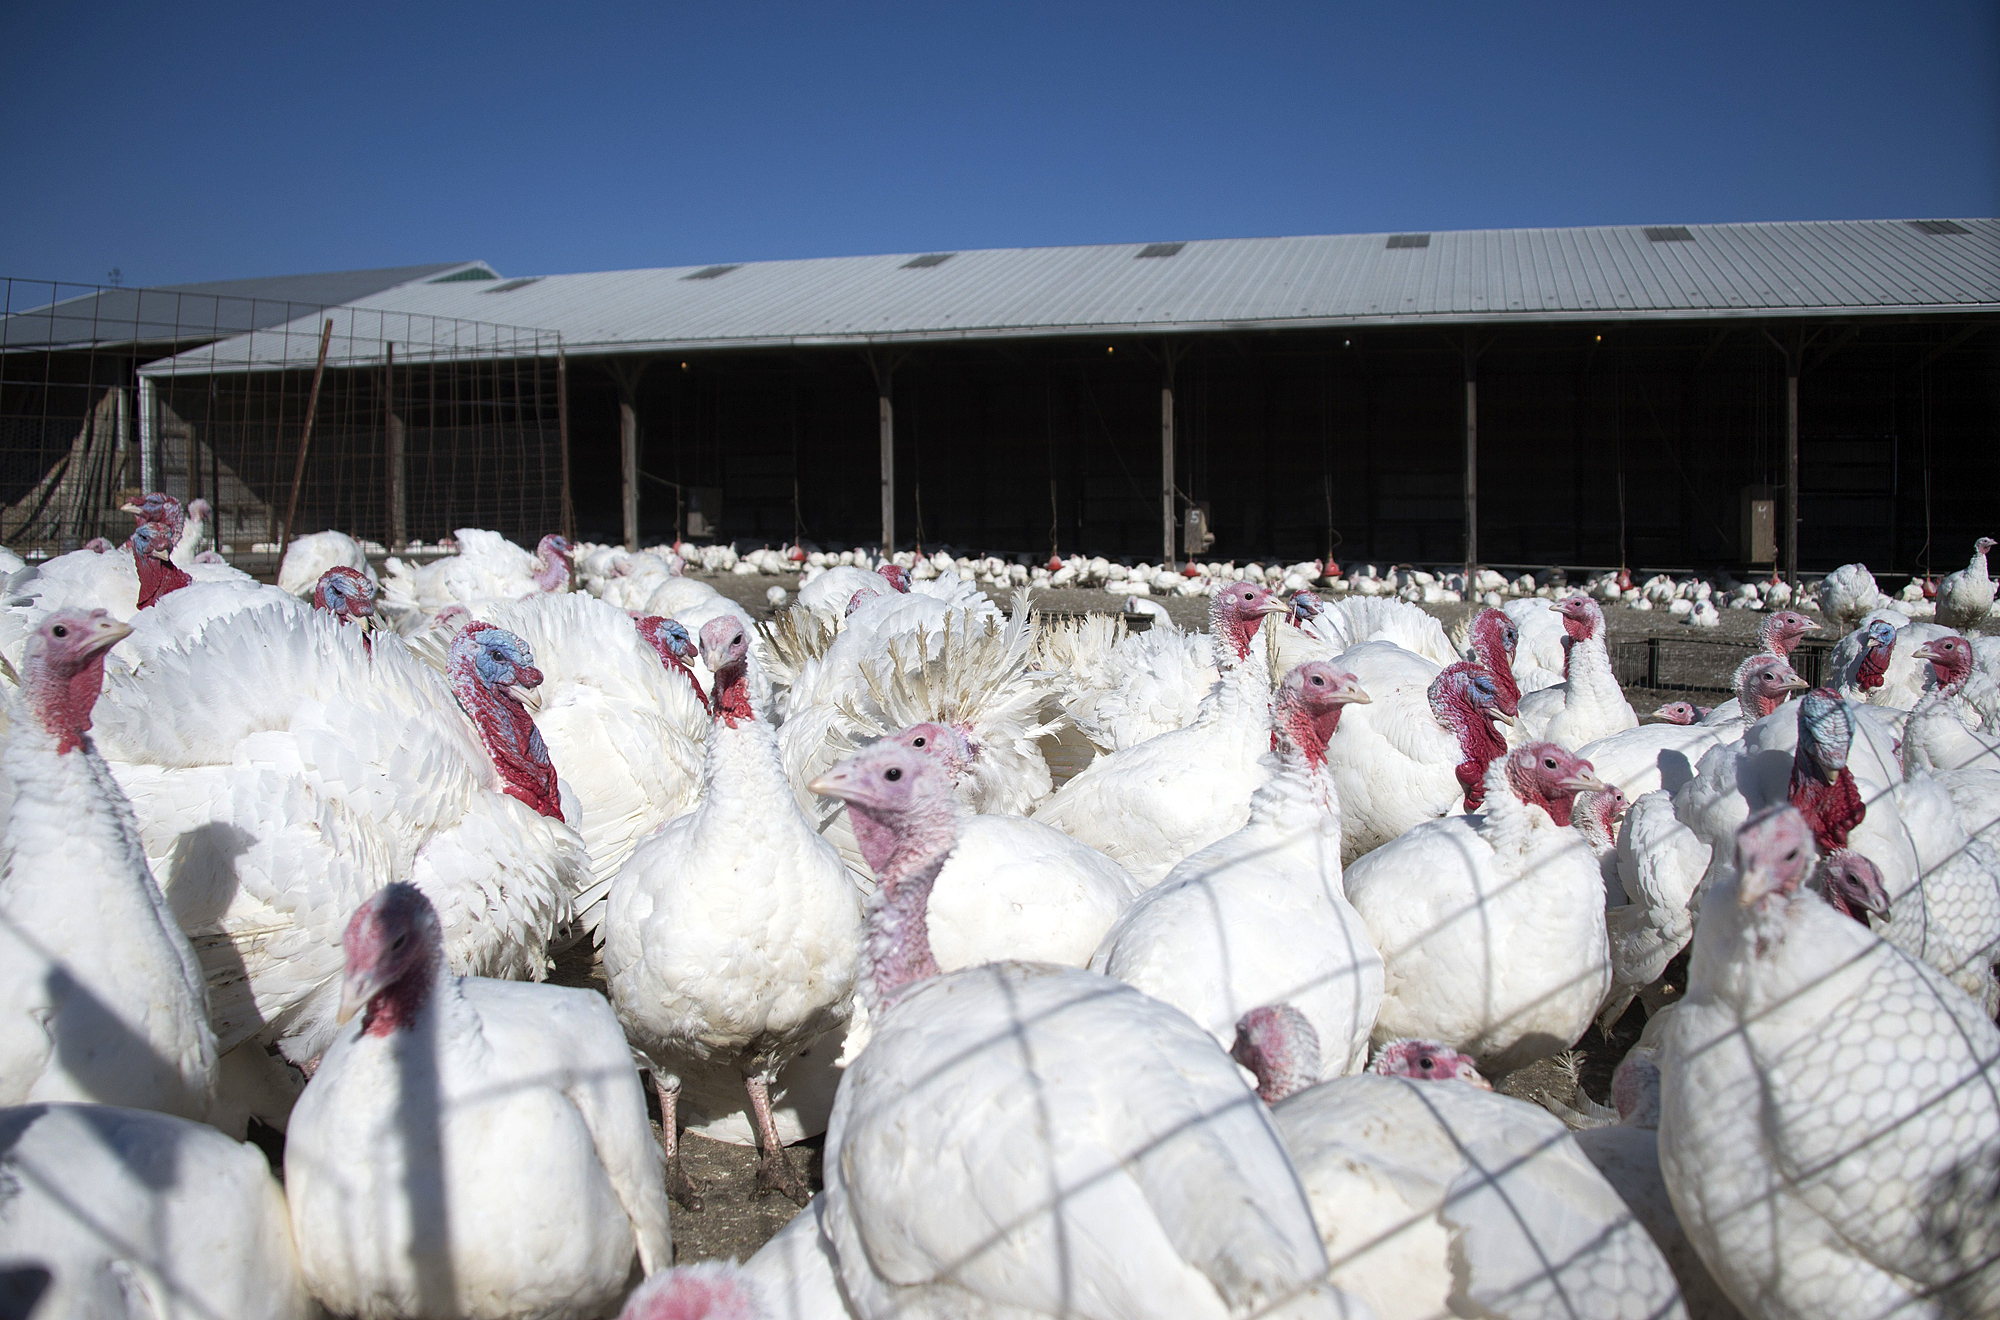 "Free-range" turkeys at Maple Lawn Farms in Fulton, Md., in November 2014.  In some cases, turkeys labeled "free-range" roam freely on a farm. But in the vast majority spend most of their time in crowded houses, consumer advocates say.